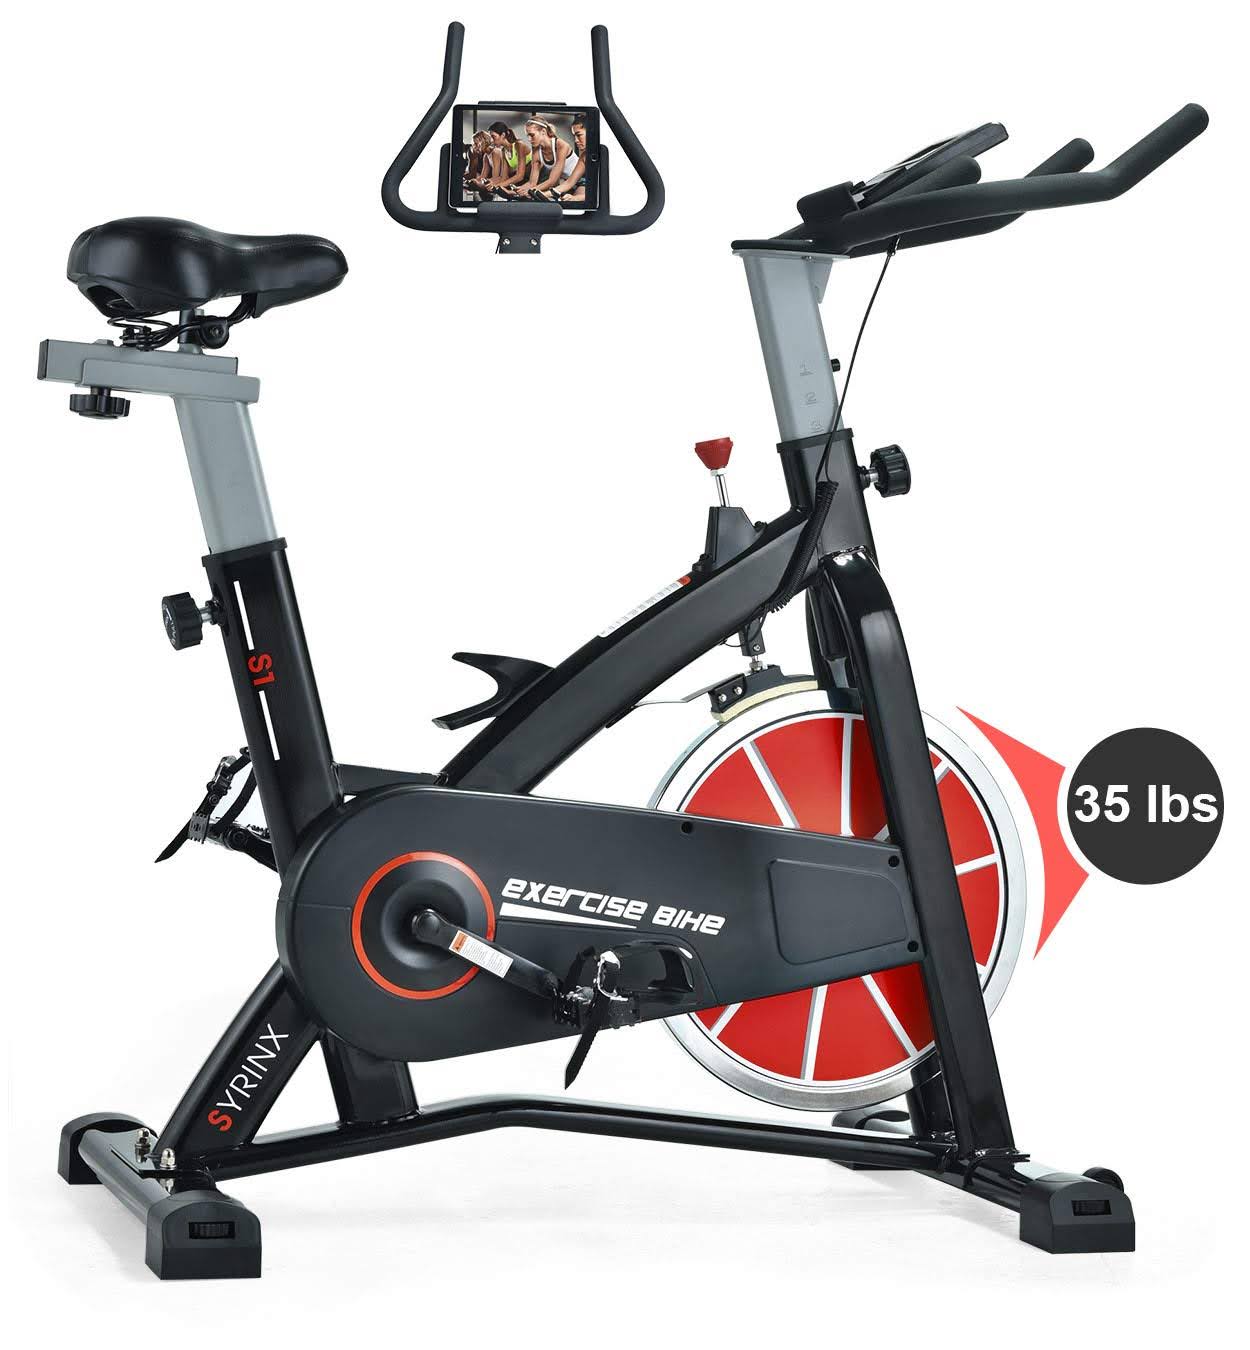 Schwinn Ic2 Indoor Cycling Bike With 31 Lb Flywheel Buy Products Online With Ubuy Maldives In Affordable Prices 39173962